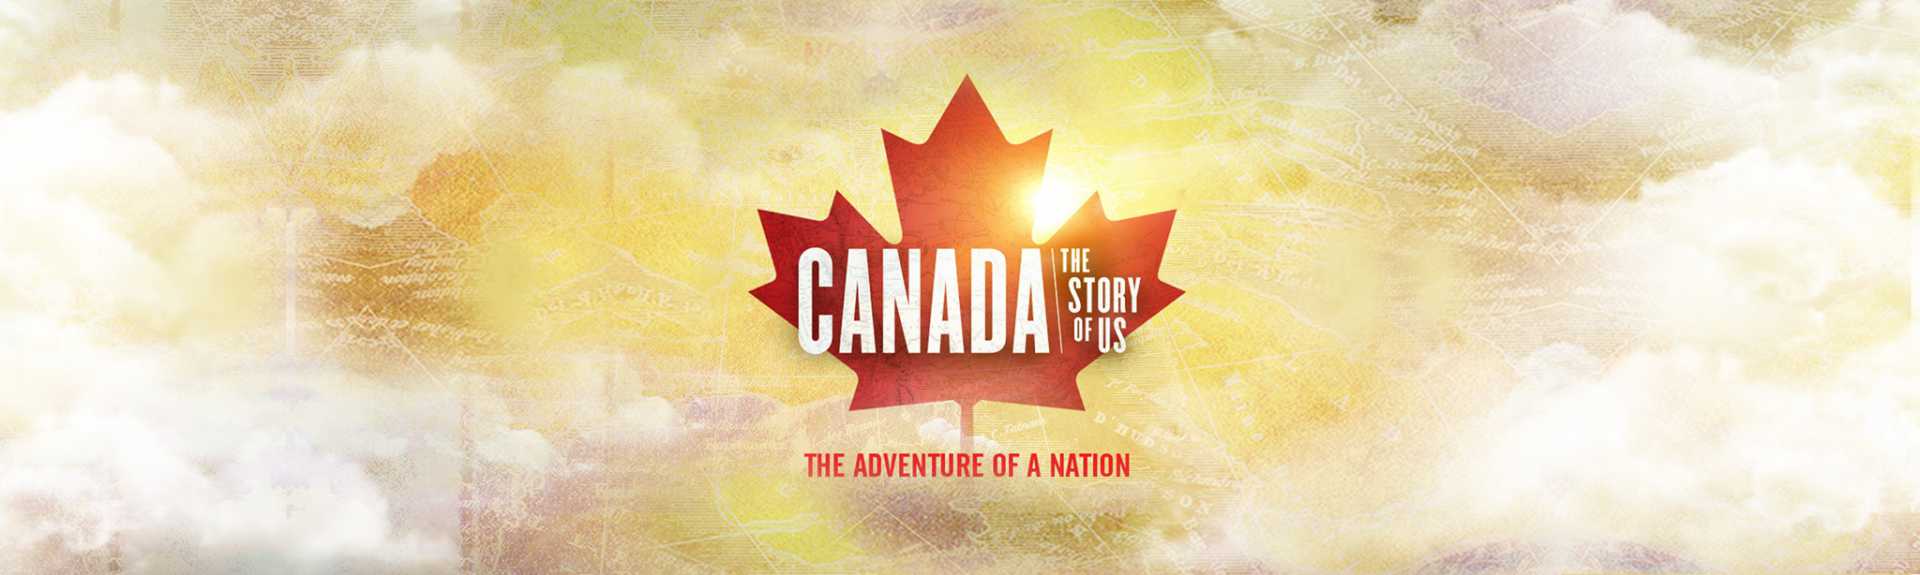 Canada: The Story of Us 360